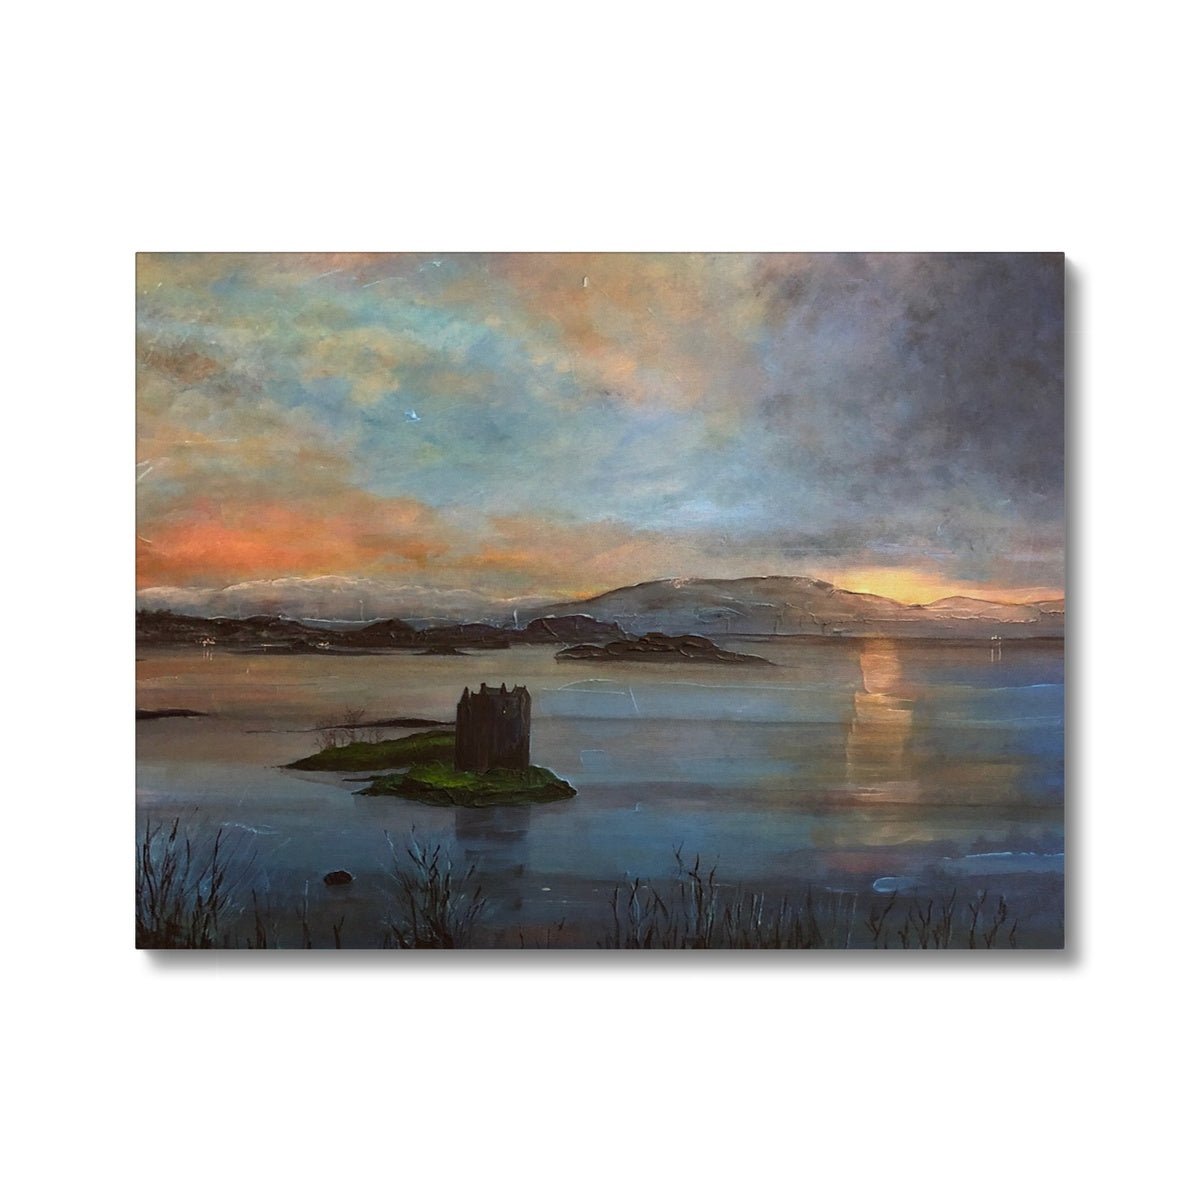 Castle Stalker Twilight Painting | Canvas From Scotland-Contemporary Stretched Canvas Prints-Historic & Iconic Scotland Art Gallery-24"x18"-Paintings, Prints, Homeware, Art Gifts From Scotland By Scottish Artist Kevin Hunter